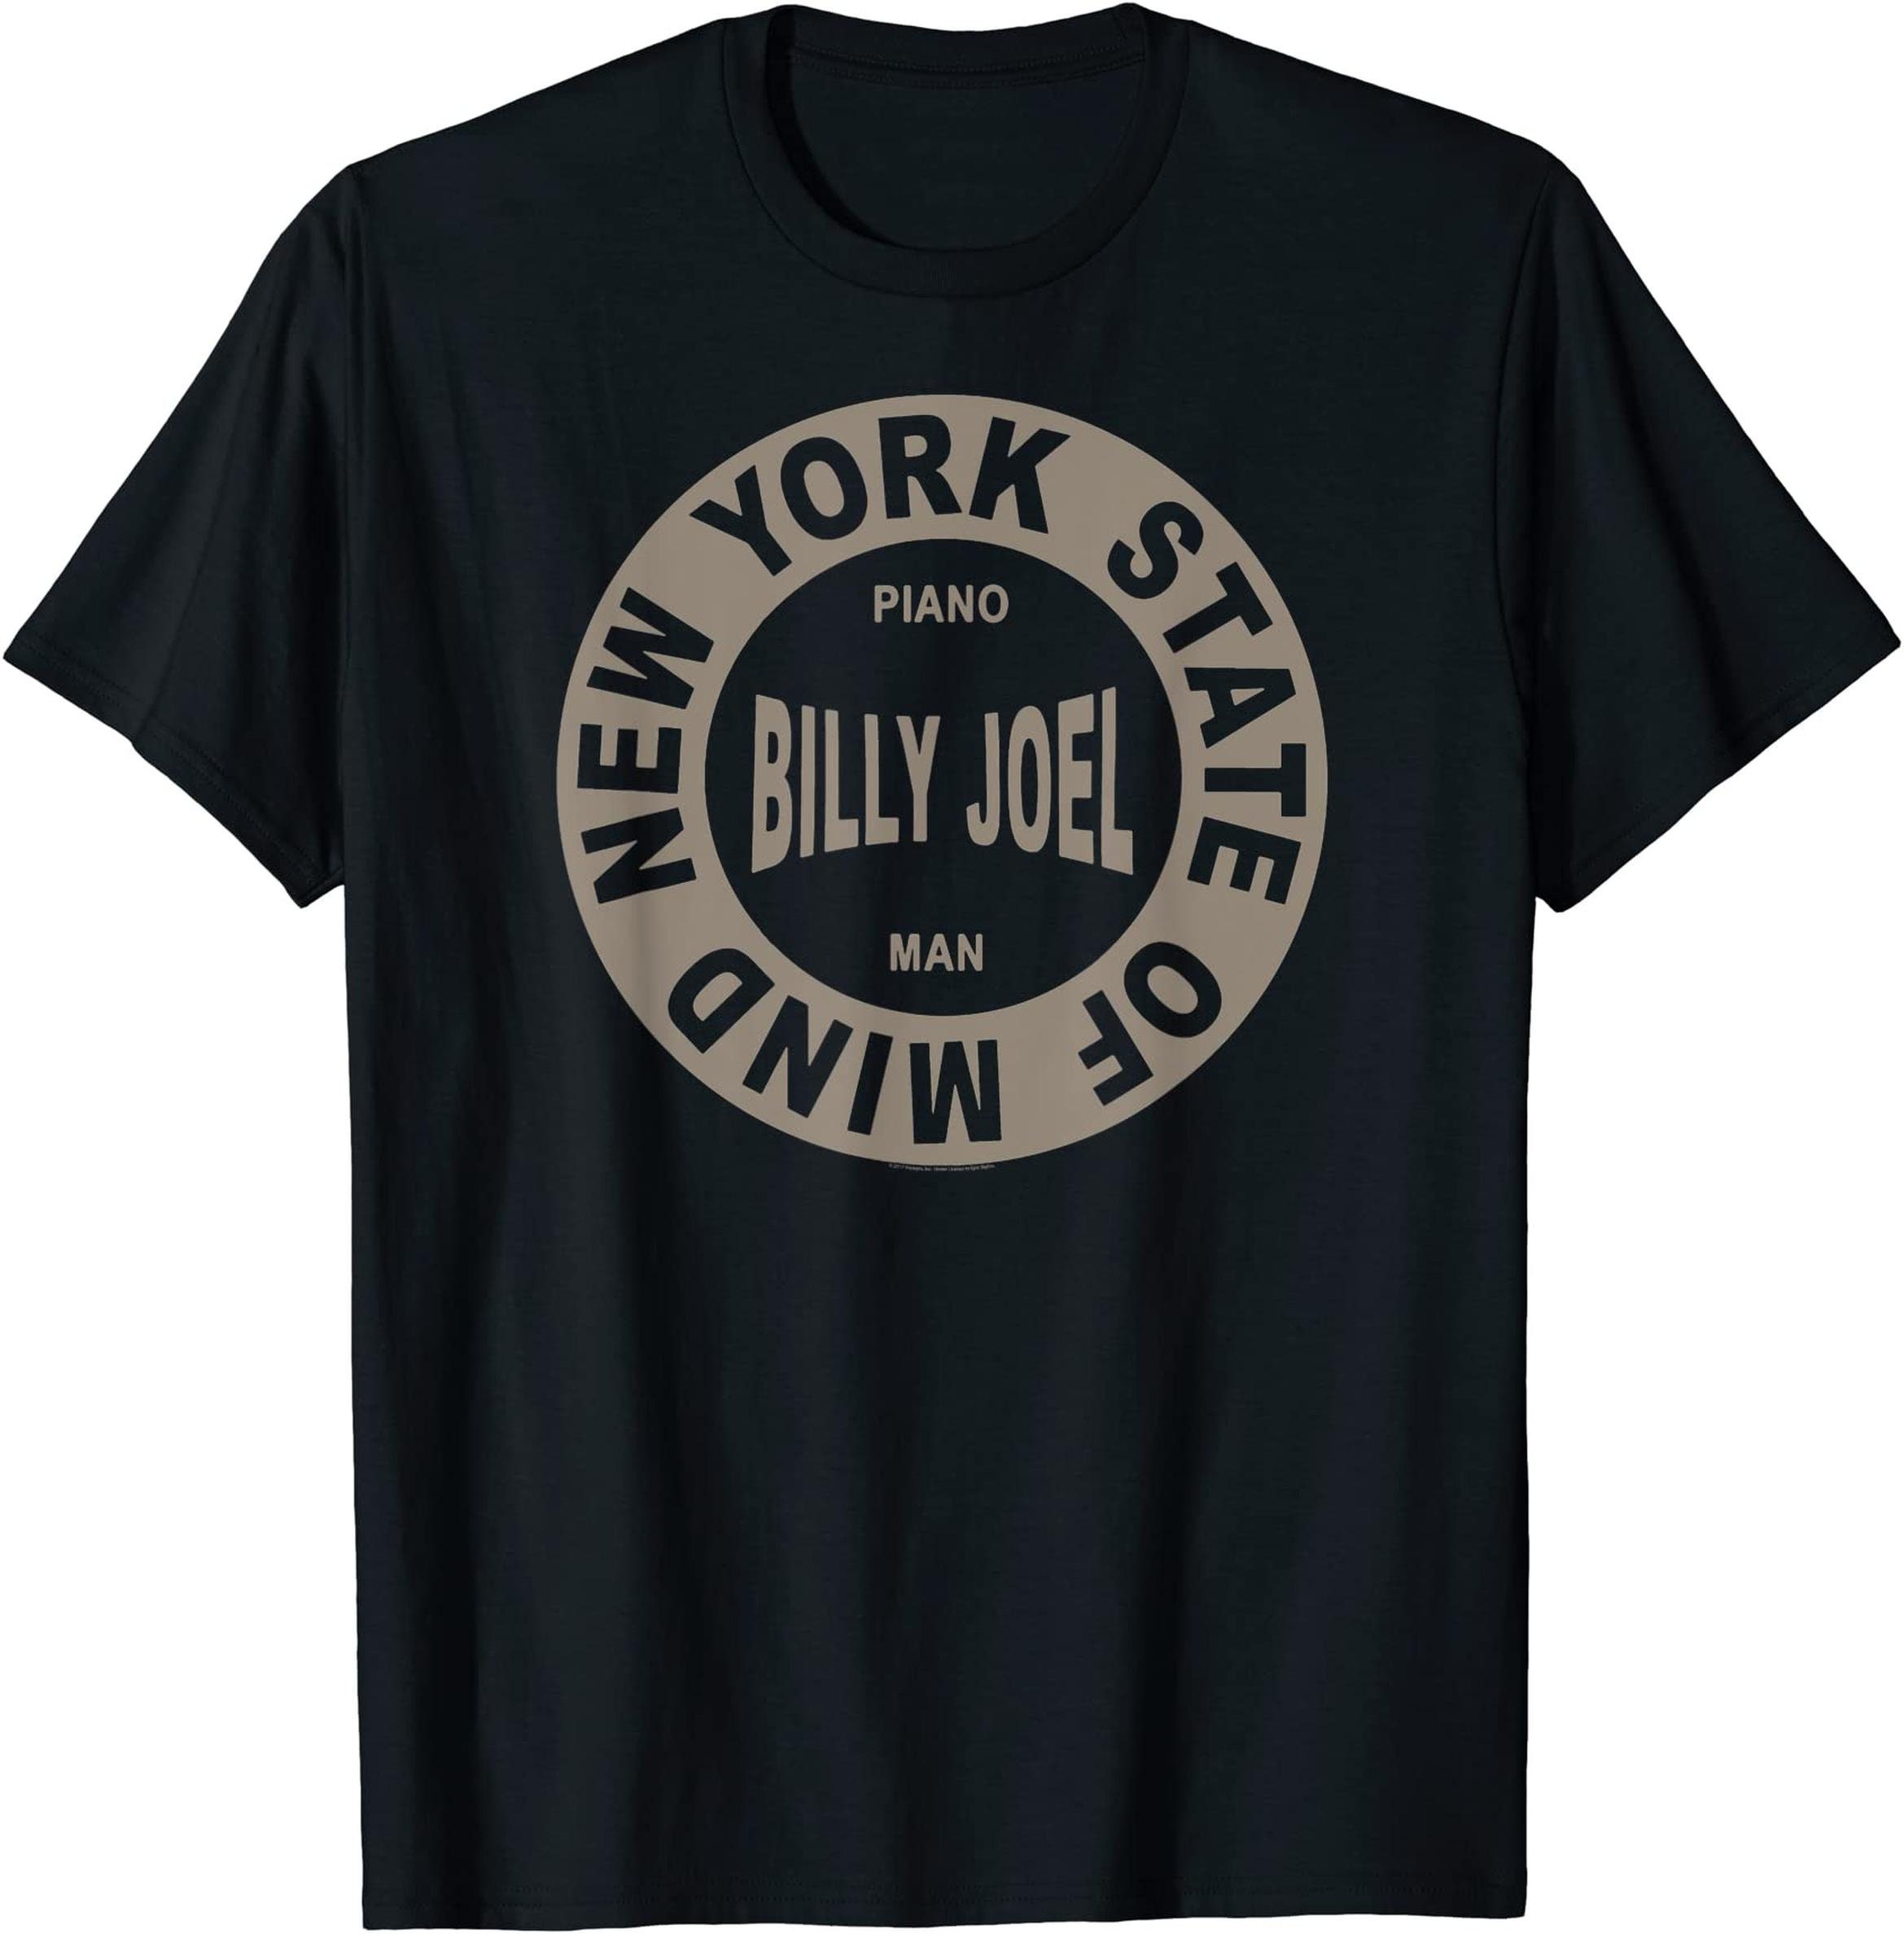 Discover Billy Joel - New York State of Mind T-shirts